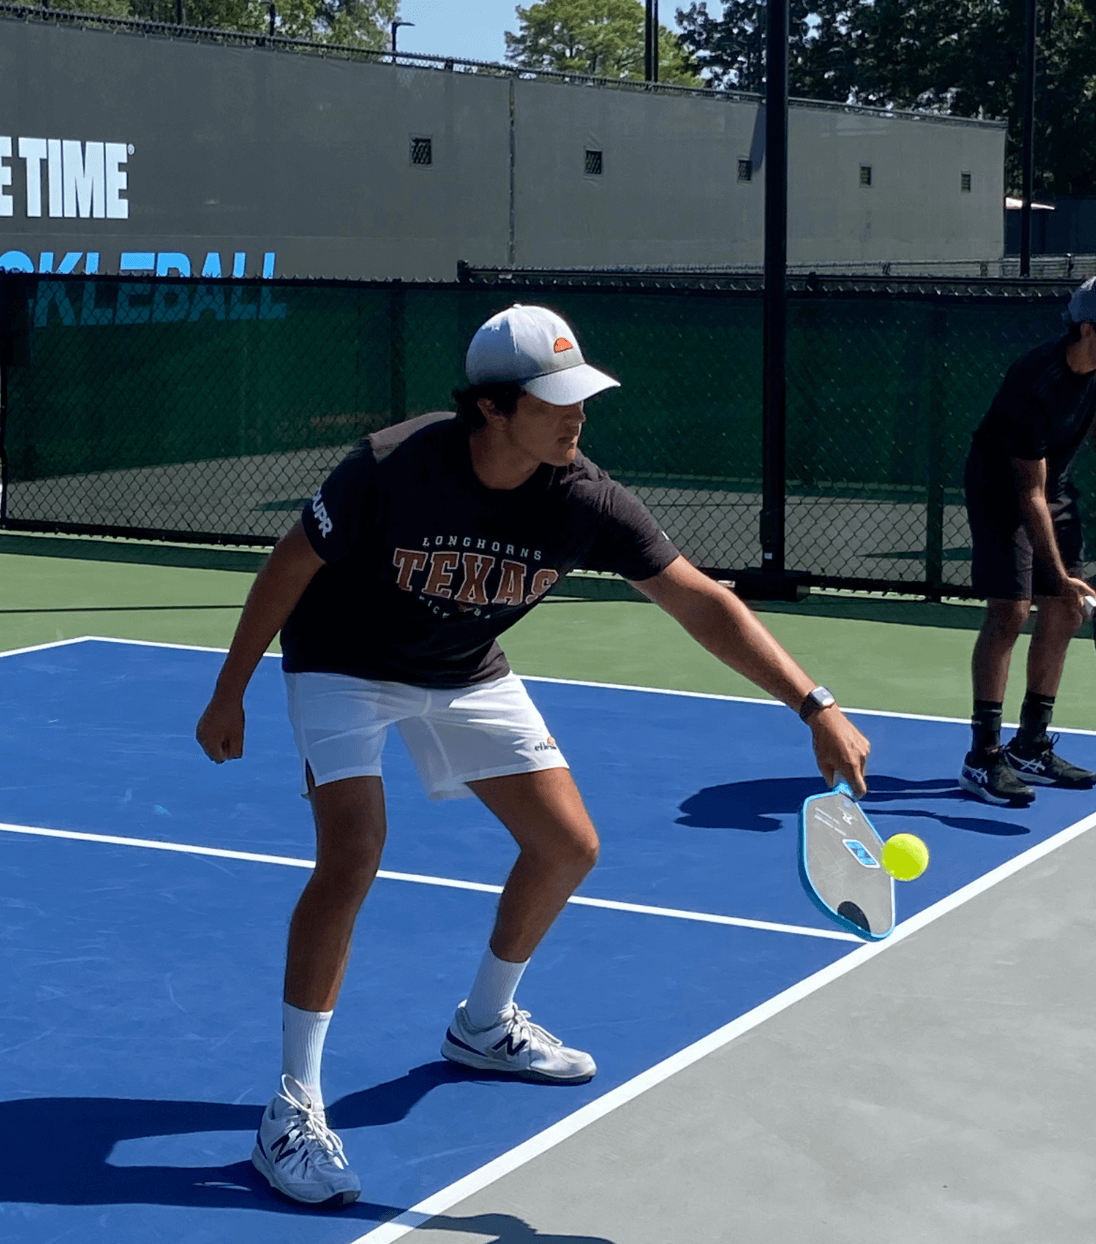 DUPR rating system hosts collegiate events; DUPR rates players on the same scale; Play pickleball